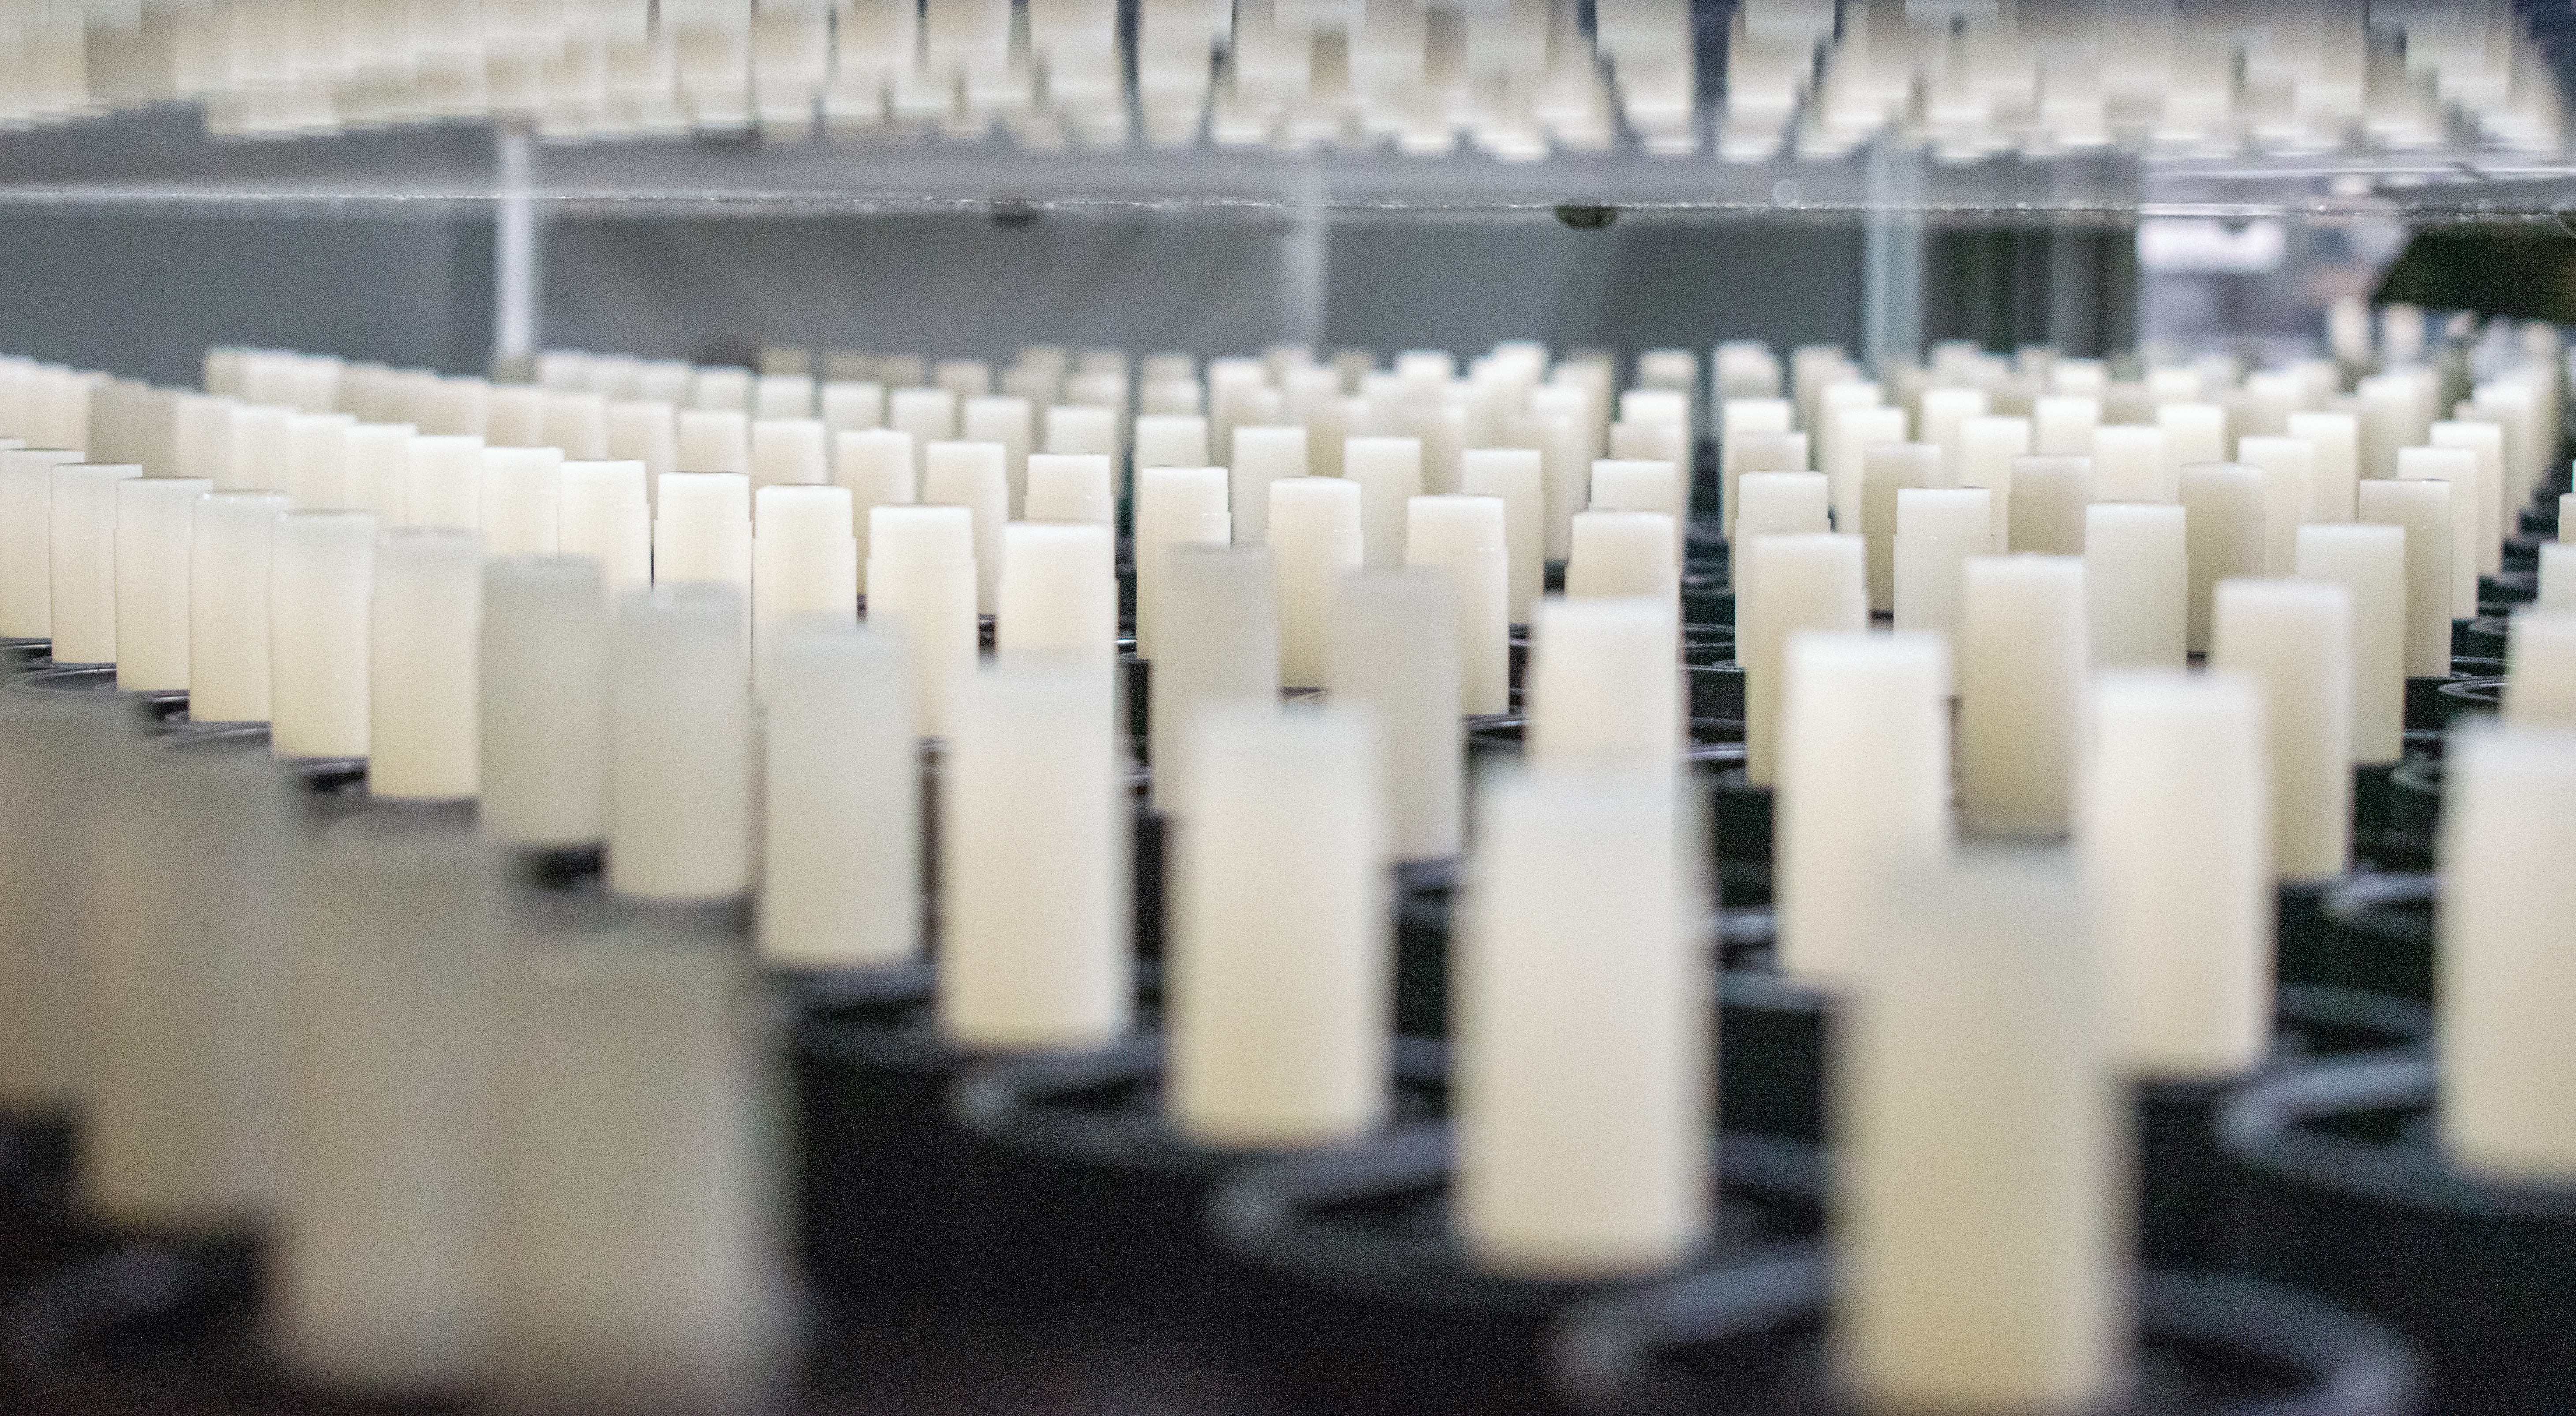 Seemingly endless rows of white lip balm tubes fill a factory floor. 